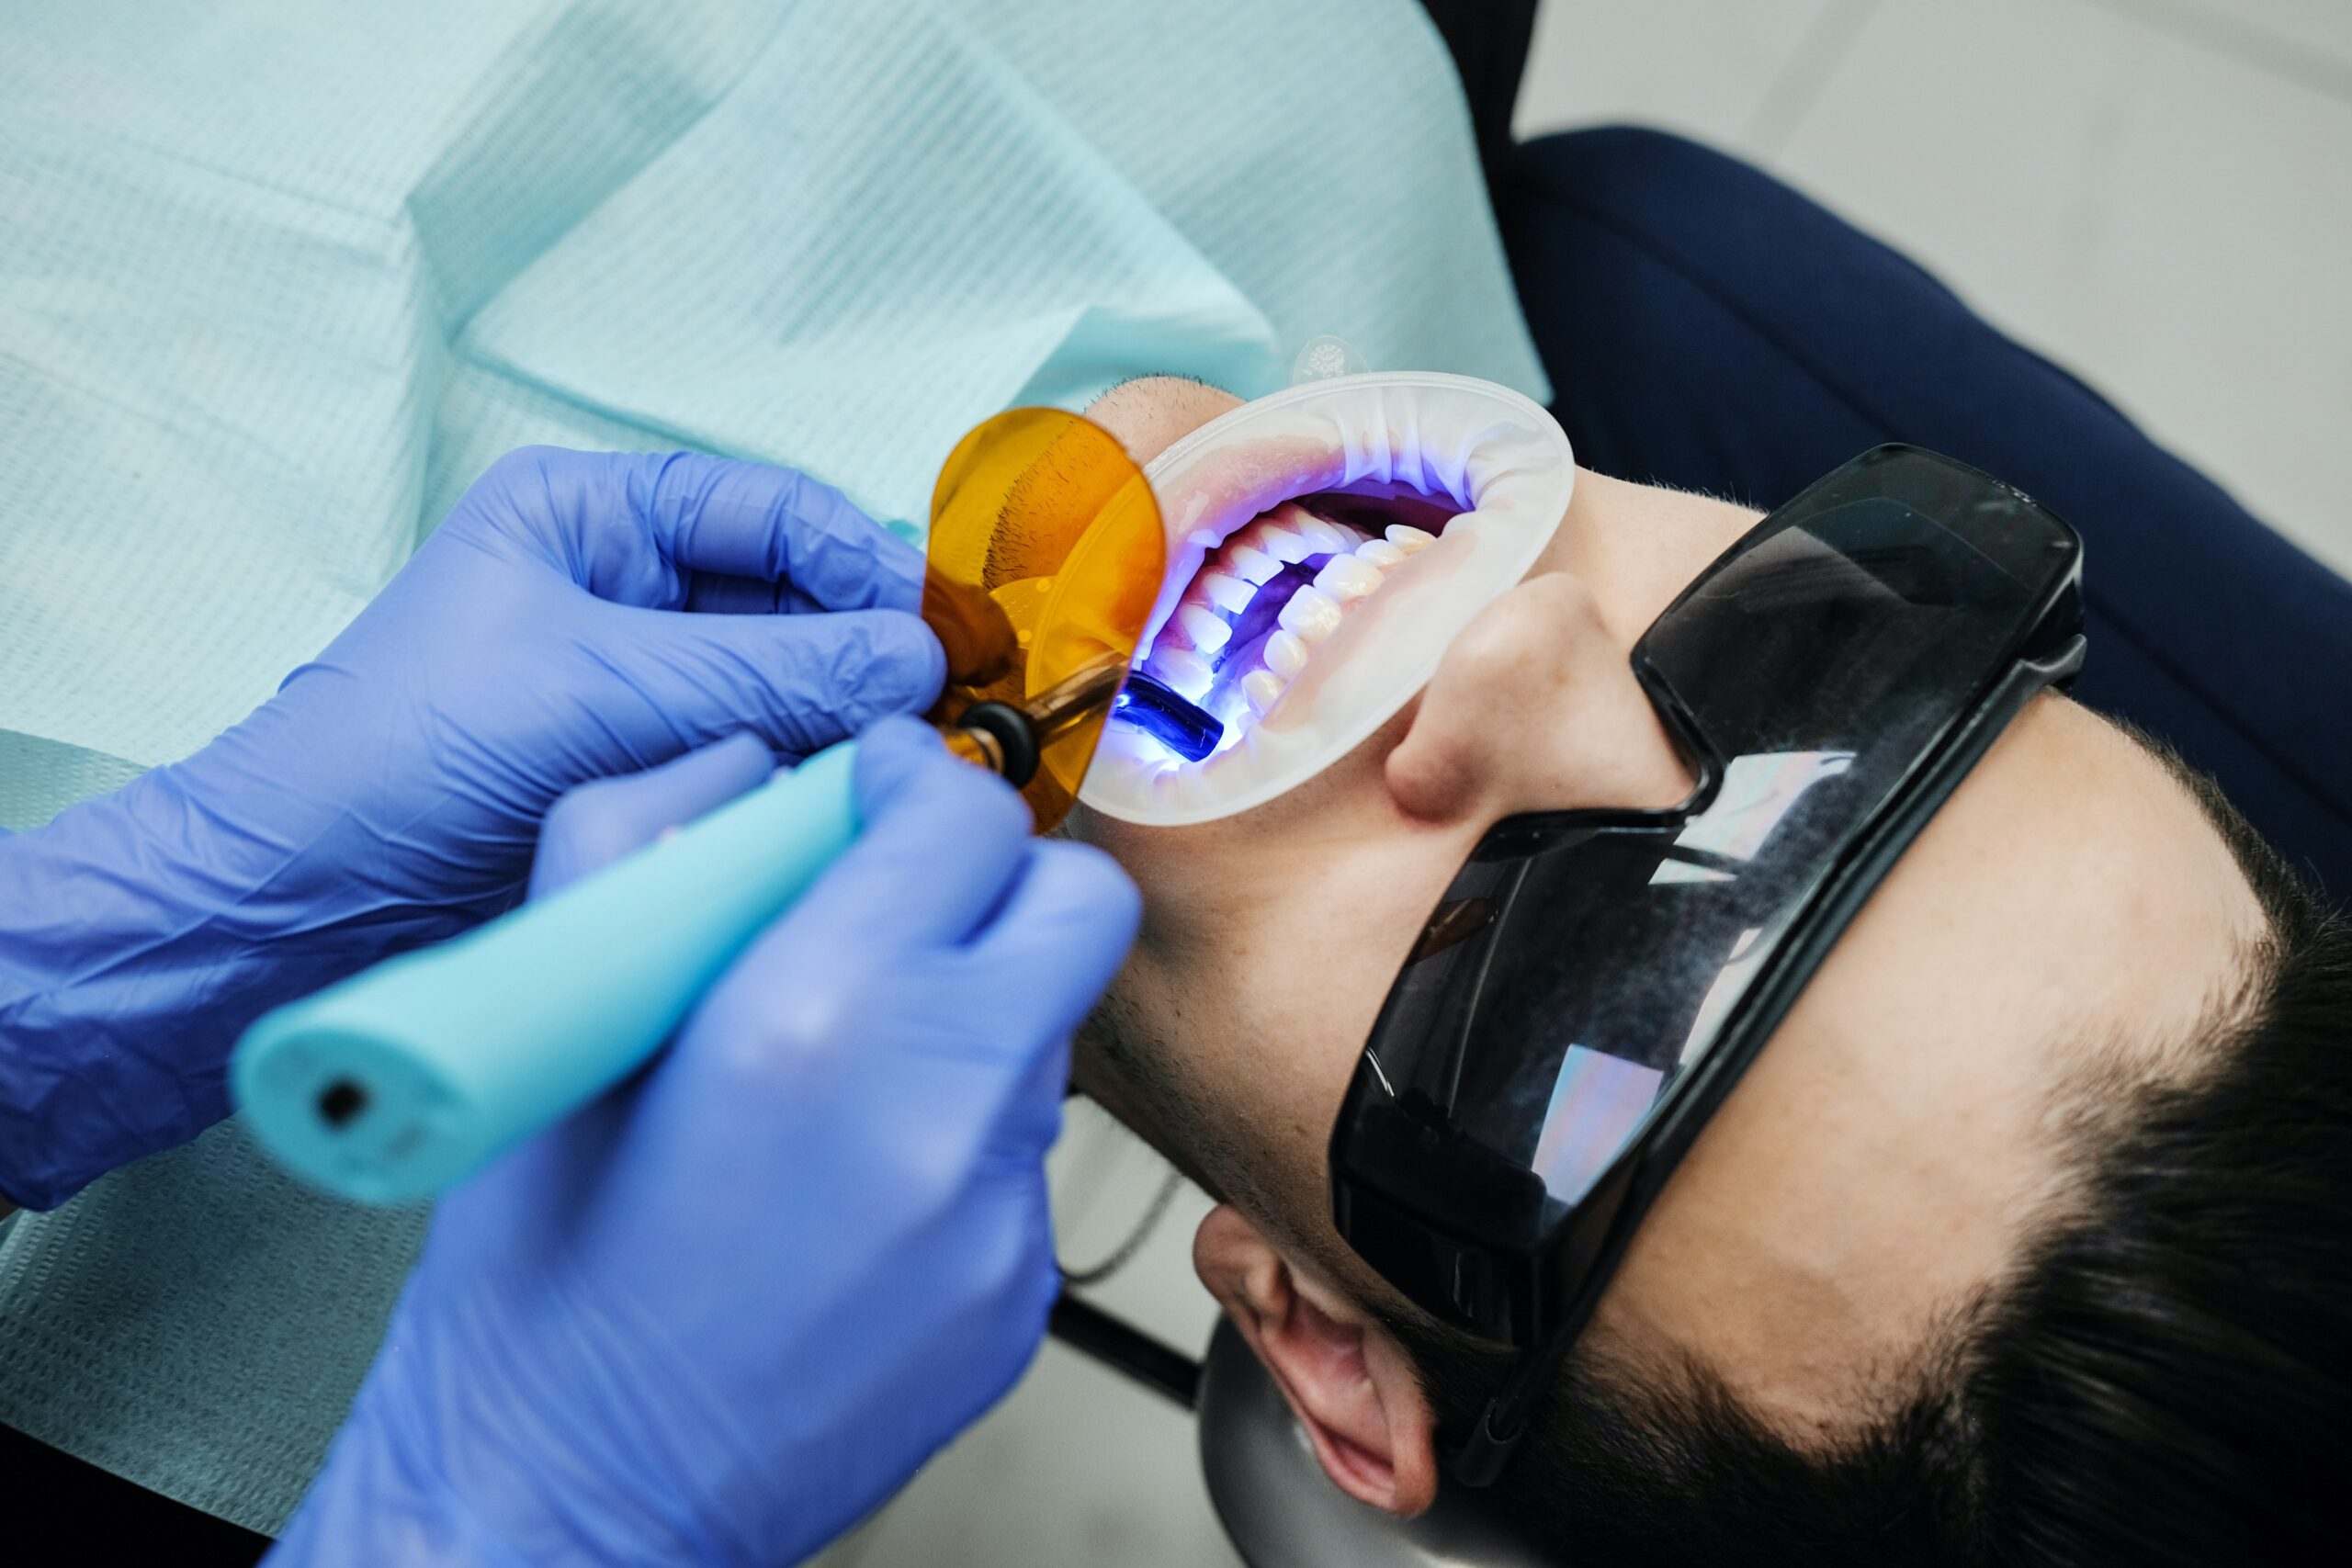 TEETH CLEANING AND WHITENING COST | TEETH CLEANING DENTAL CLINIC INDIRANAGAR | TEETH CLEANING CHARGES IN BANGALORE | TEETH CLEANING BANGALORE | ULTRASONIC TEETH CLEANING COST